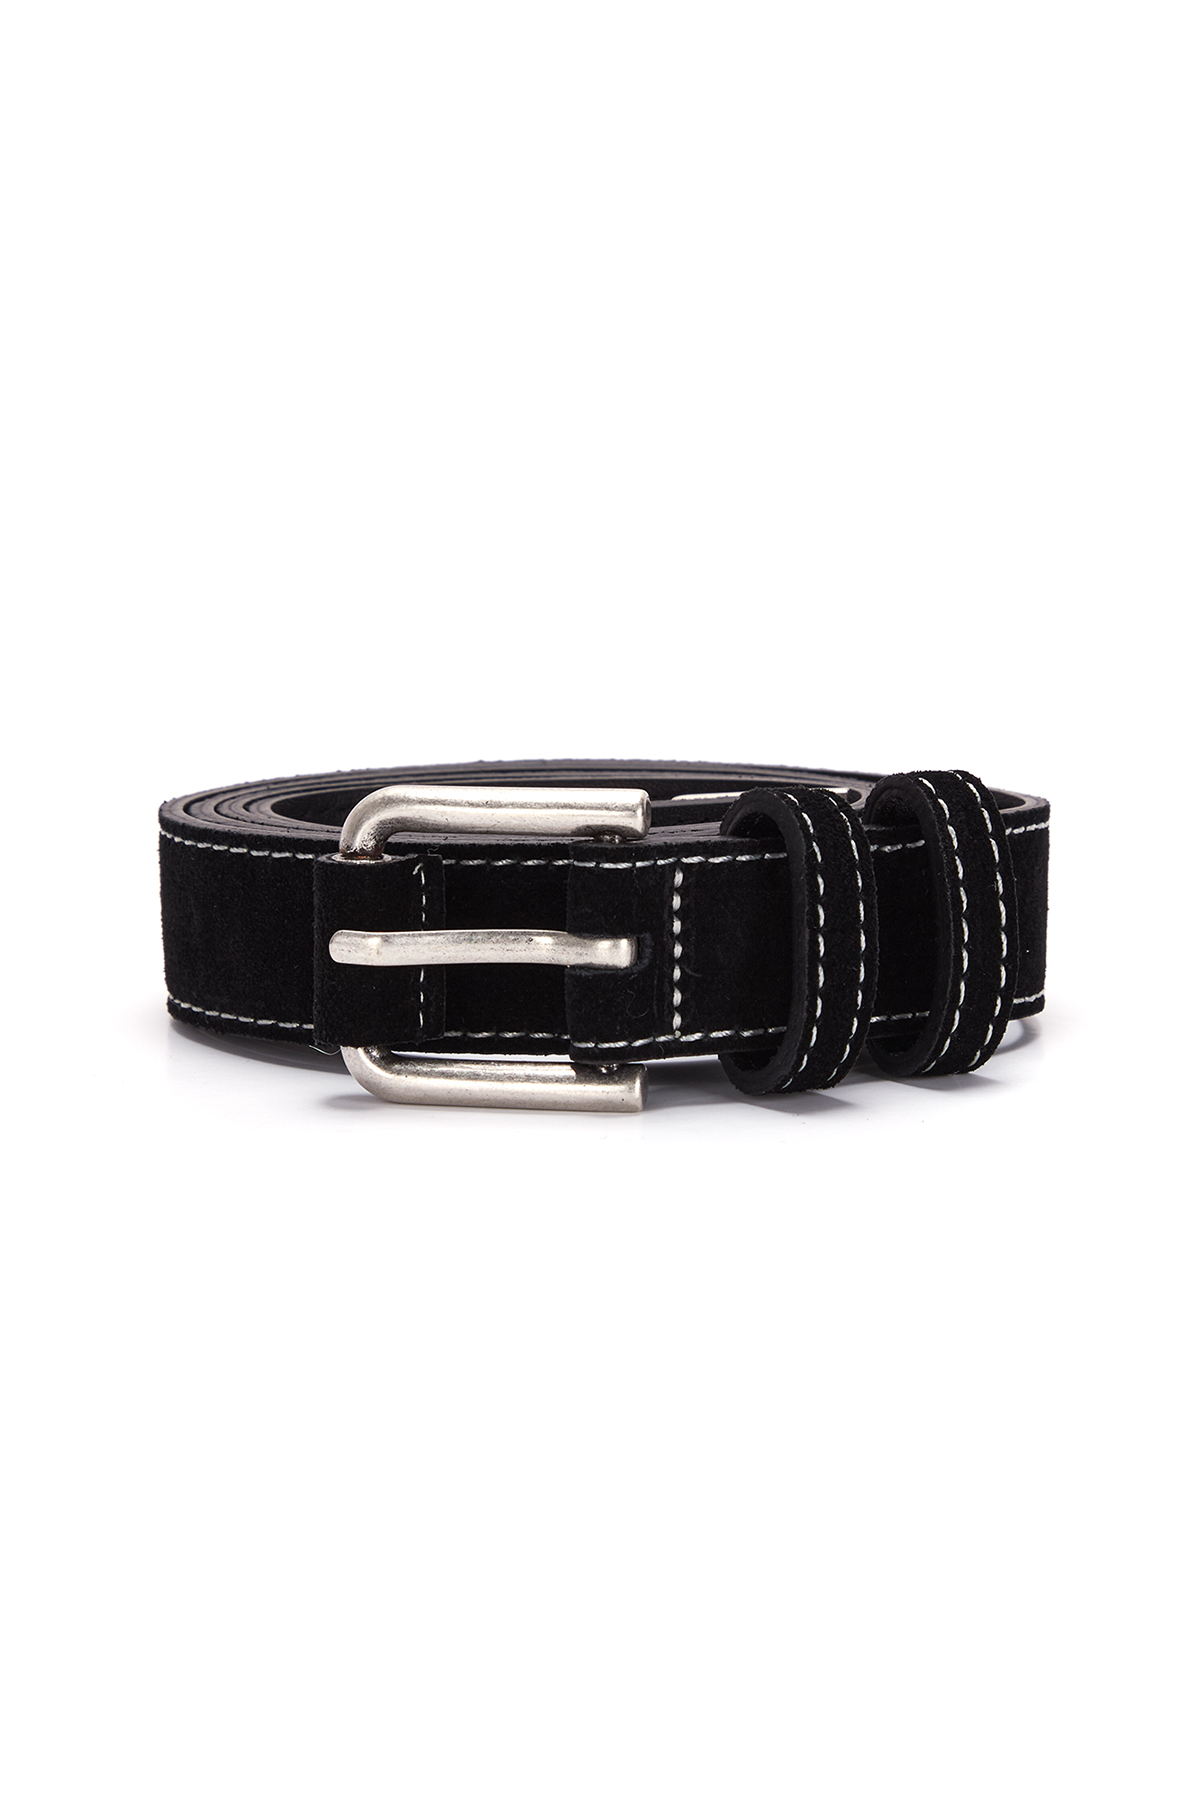 SUEDE LEATHER BELT IN BLACK